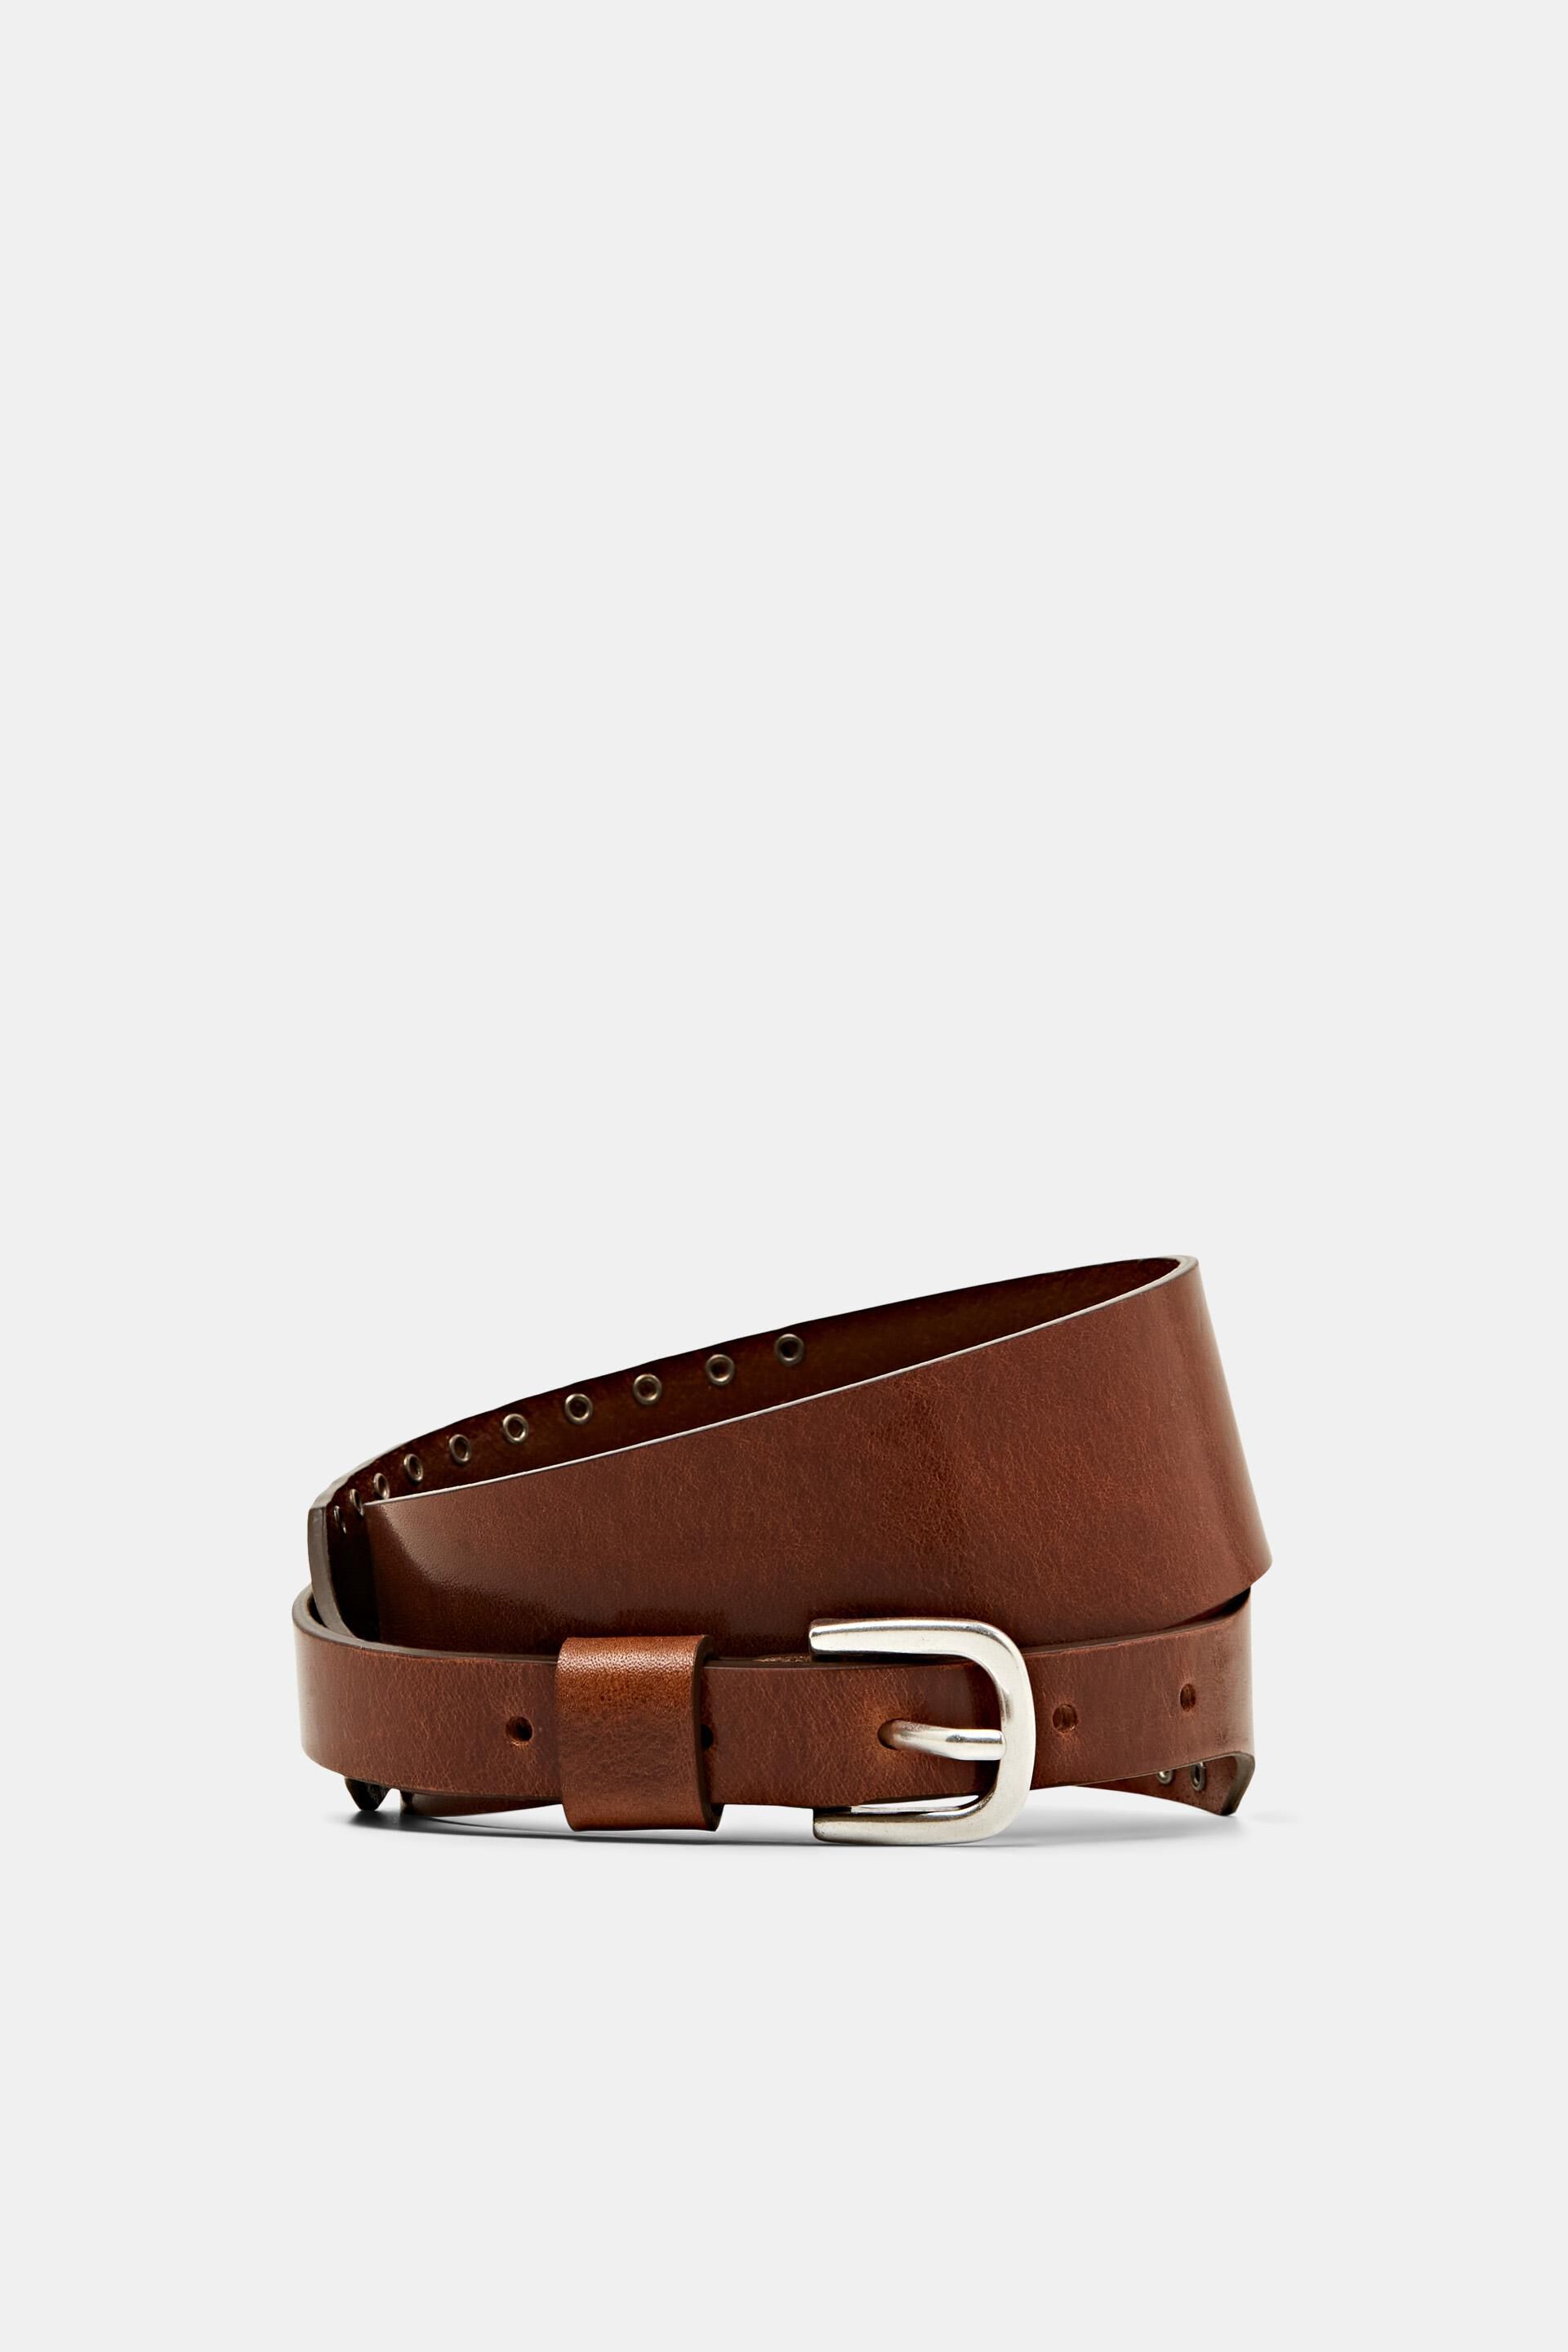 Esprit leather studs, with belt Waist 100% real